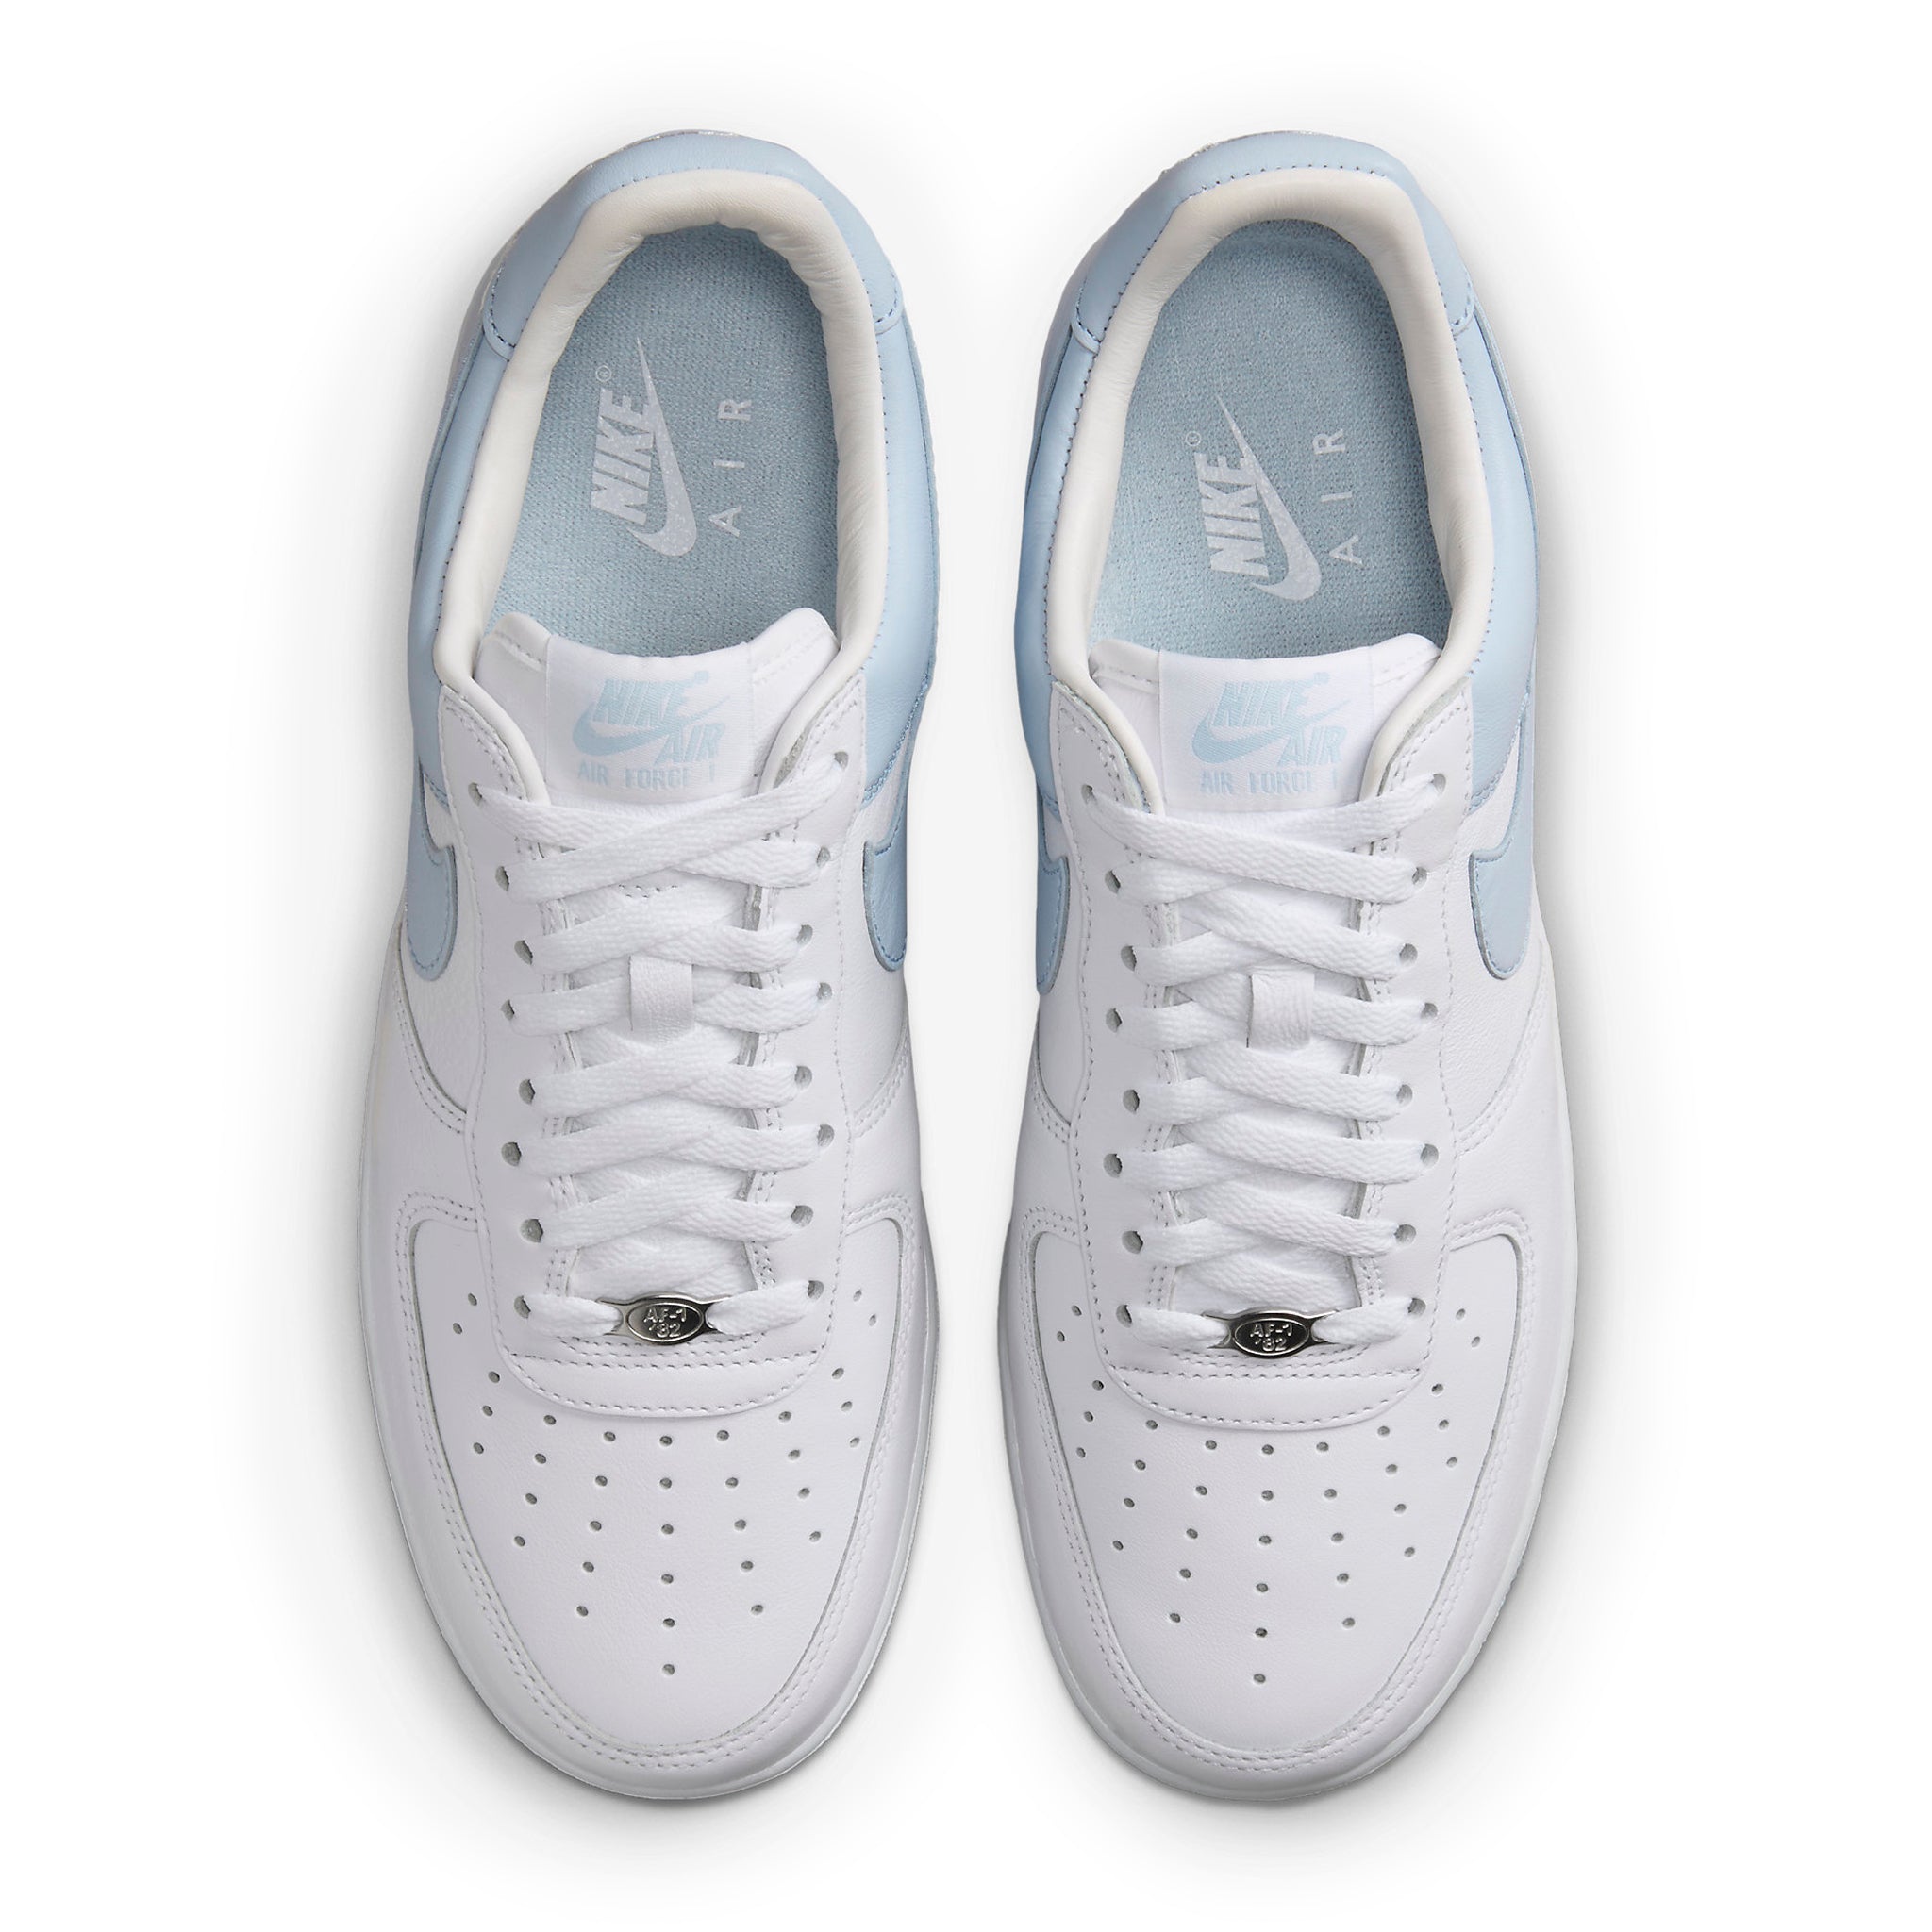 Top view of Terror Squad x Nike Air Force 1 Low Loyalty FJ5755-100